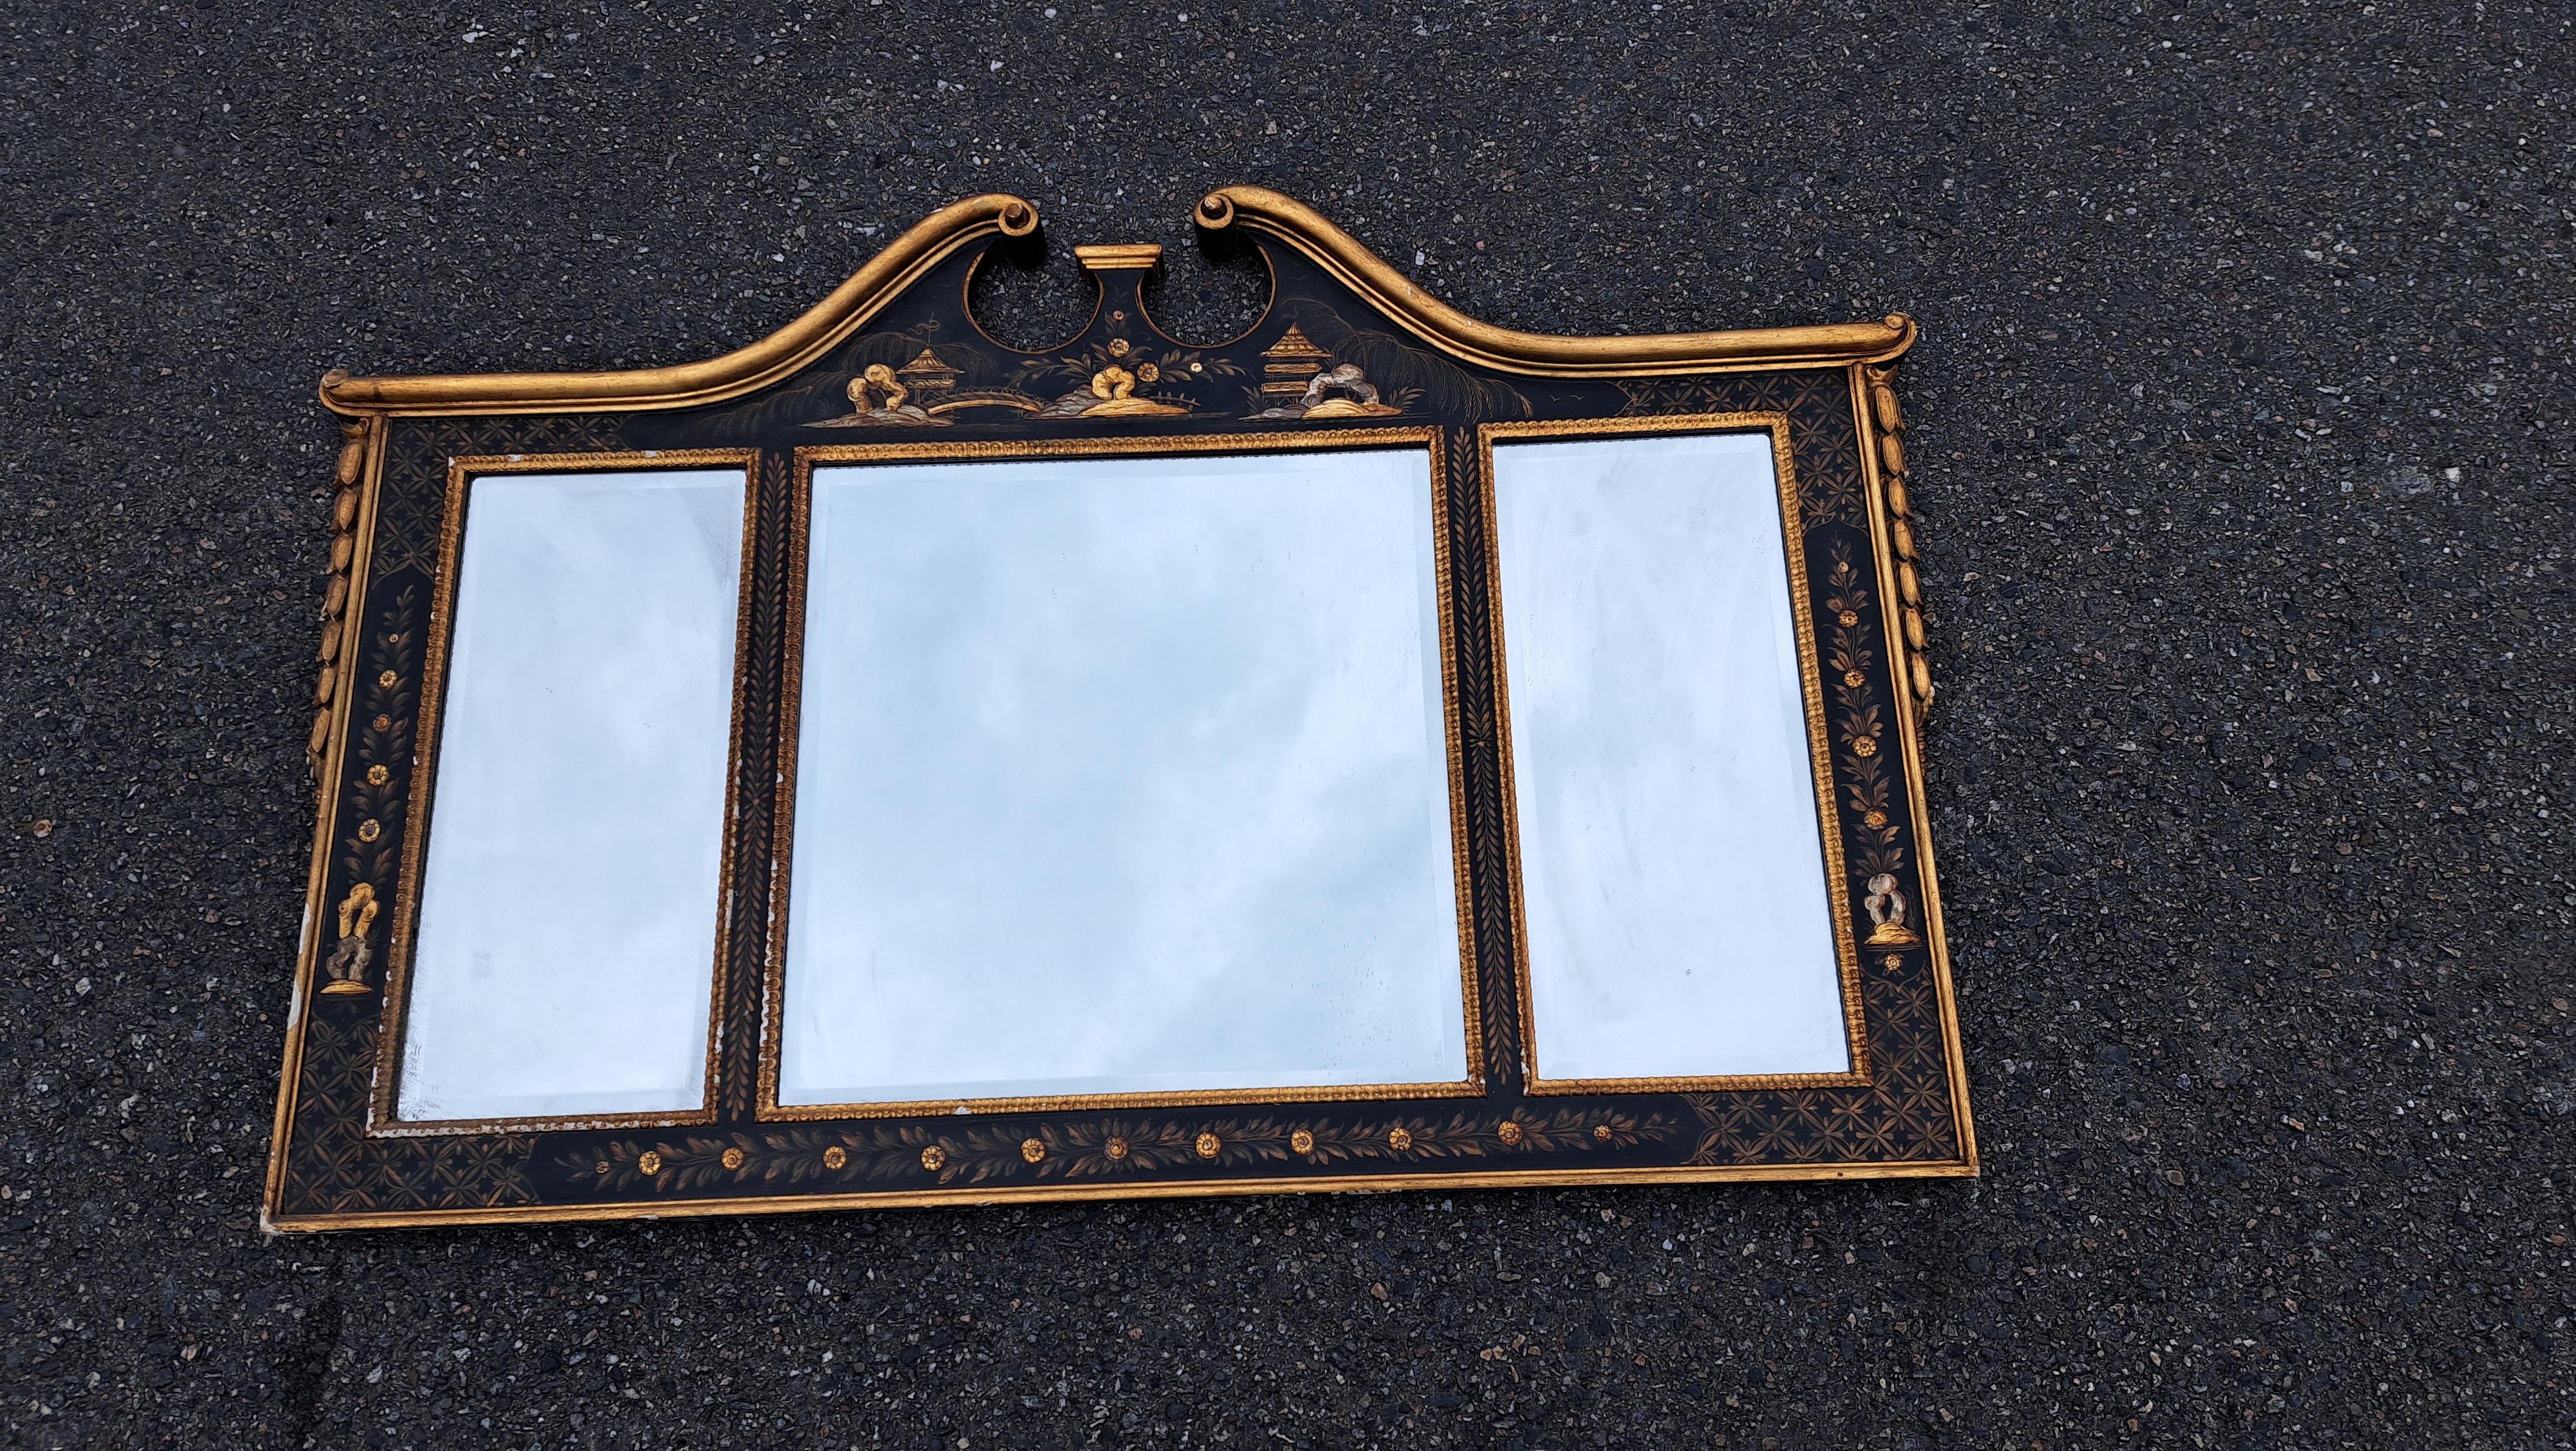 Impressive antique gilt and black painted Chinoiserie three panel beveled mirror . Made in Italy by leading mirror maker La Barge.